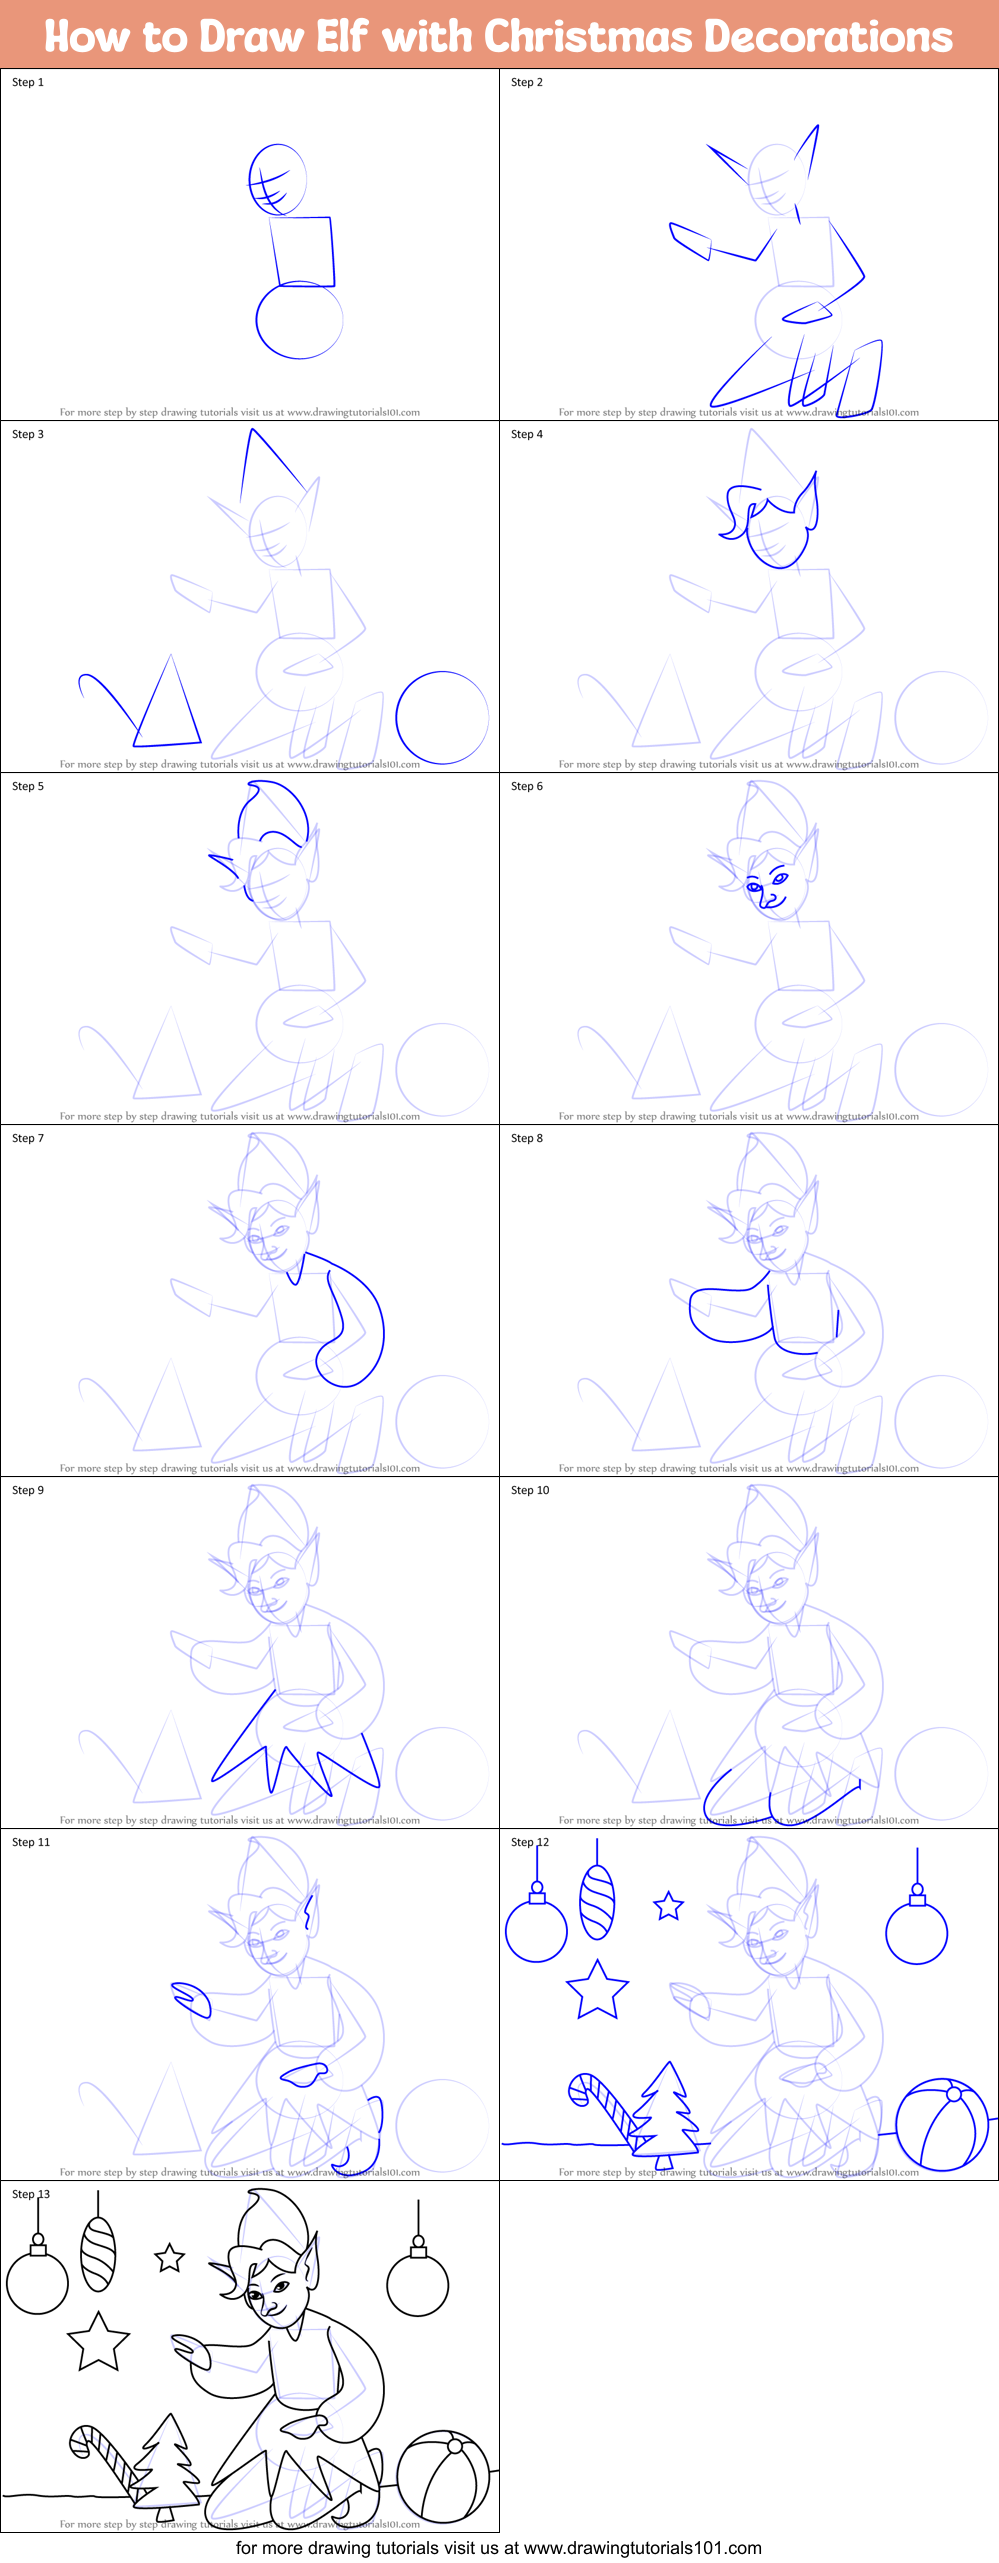 How to Draw Elf with Christmas Decorations (Christmas) Step by Step ...